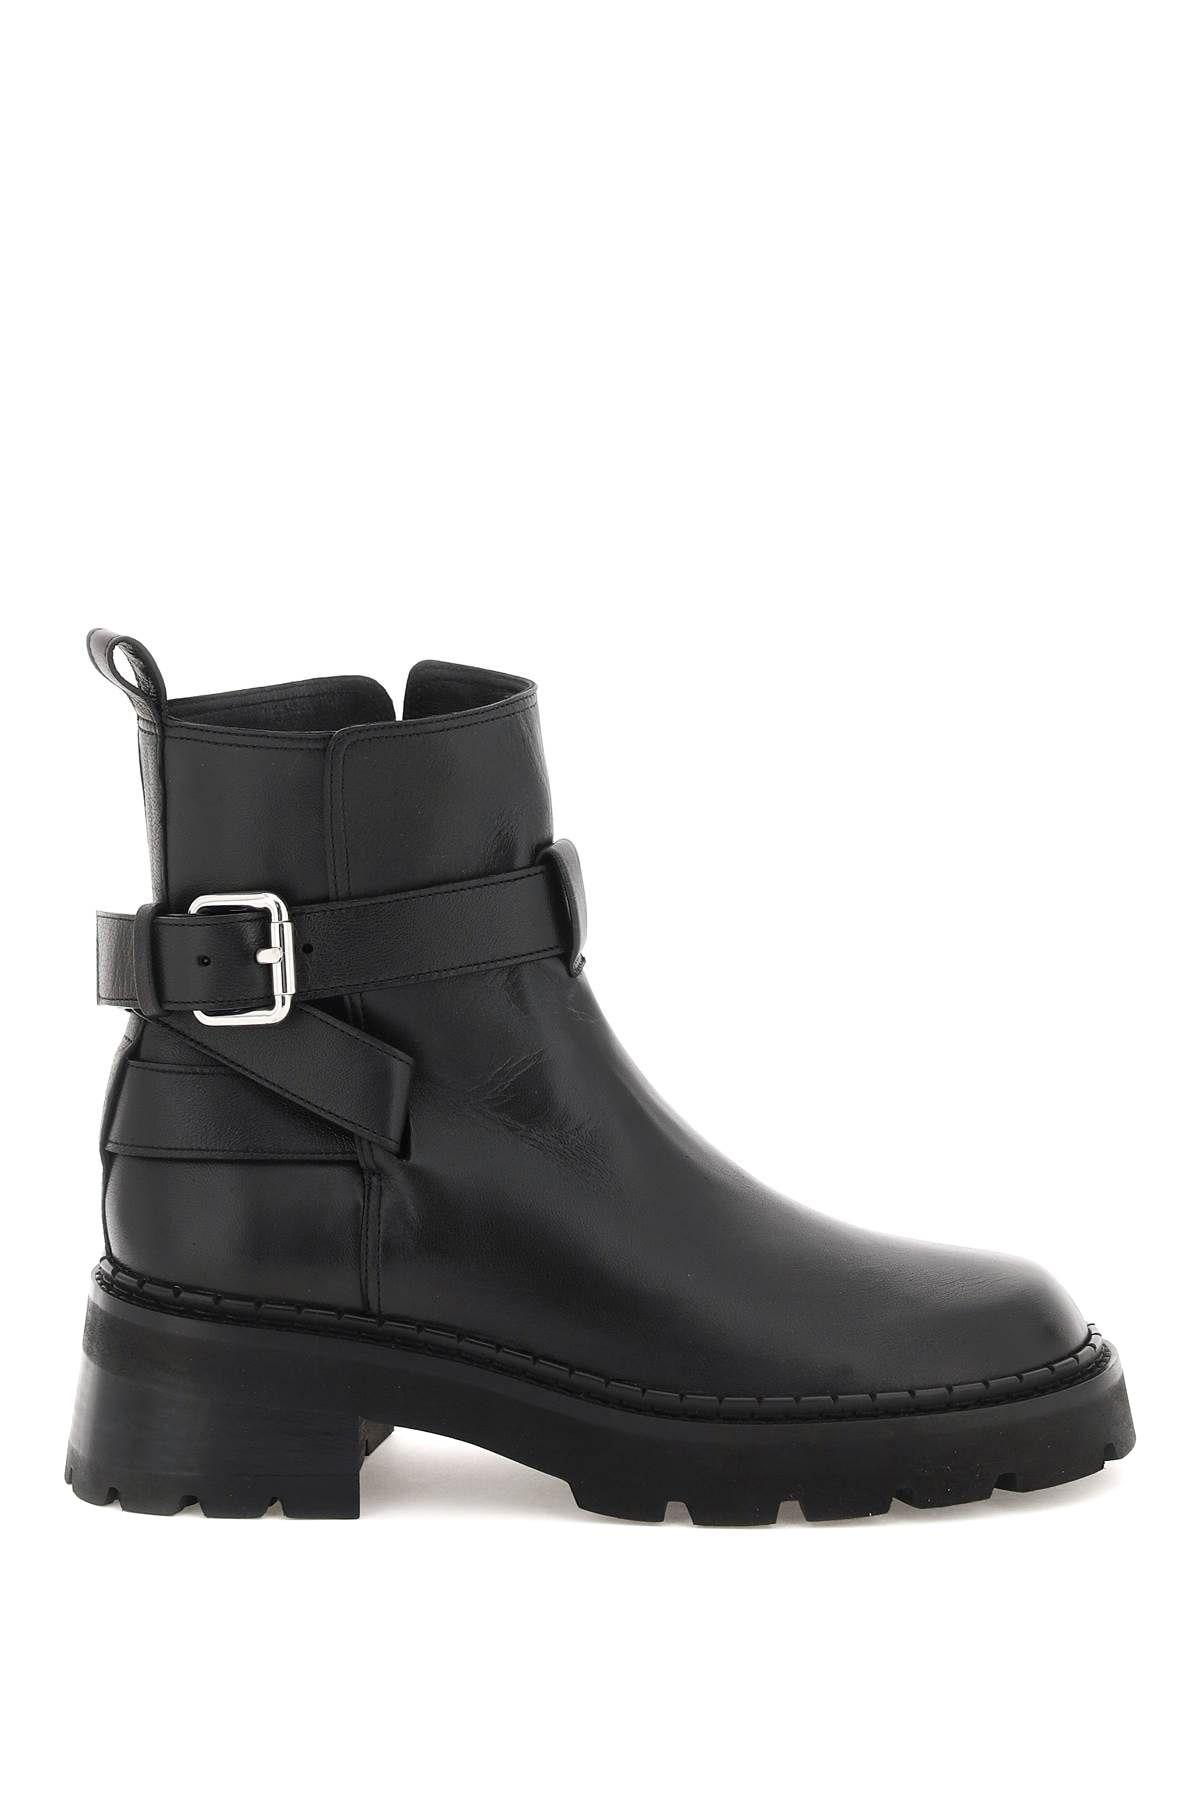 BY FAR Nappa Leather warner2 Ankle Boots